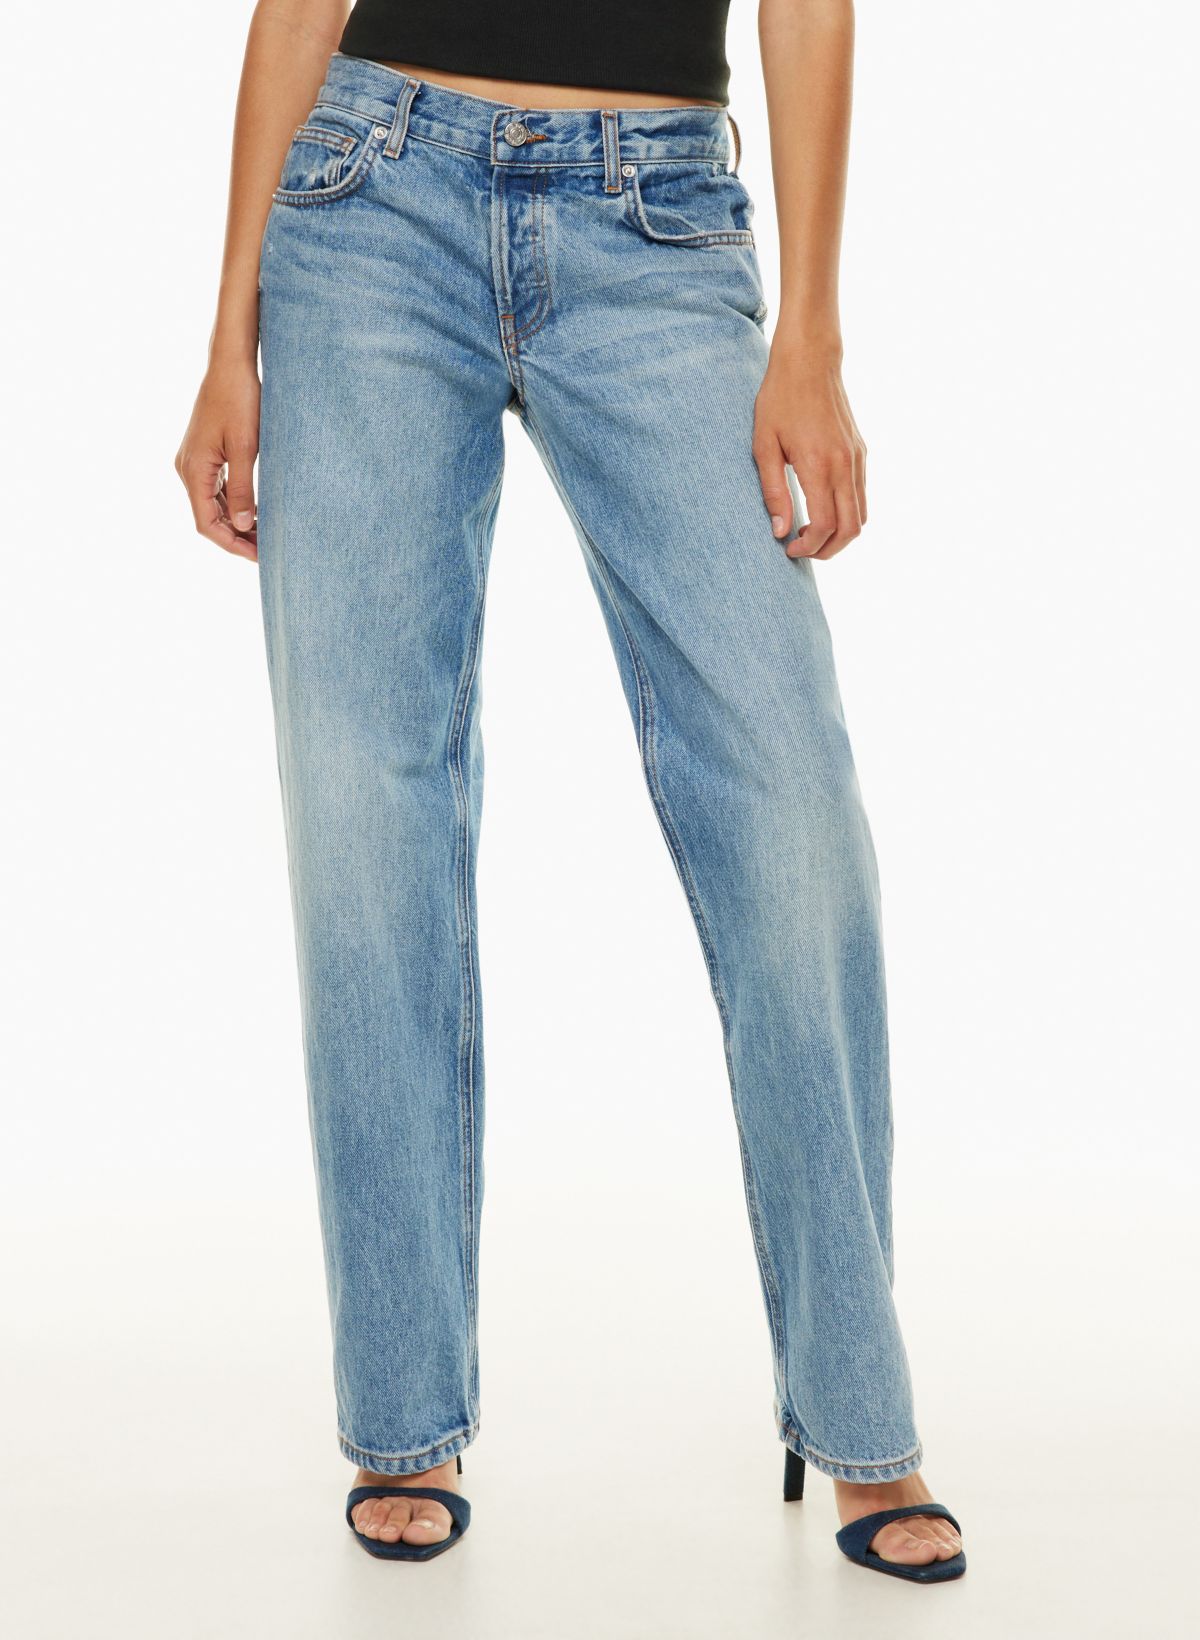 31 Low-Rise Baggy Jeans That Offer a Comfortable Entry Point to